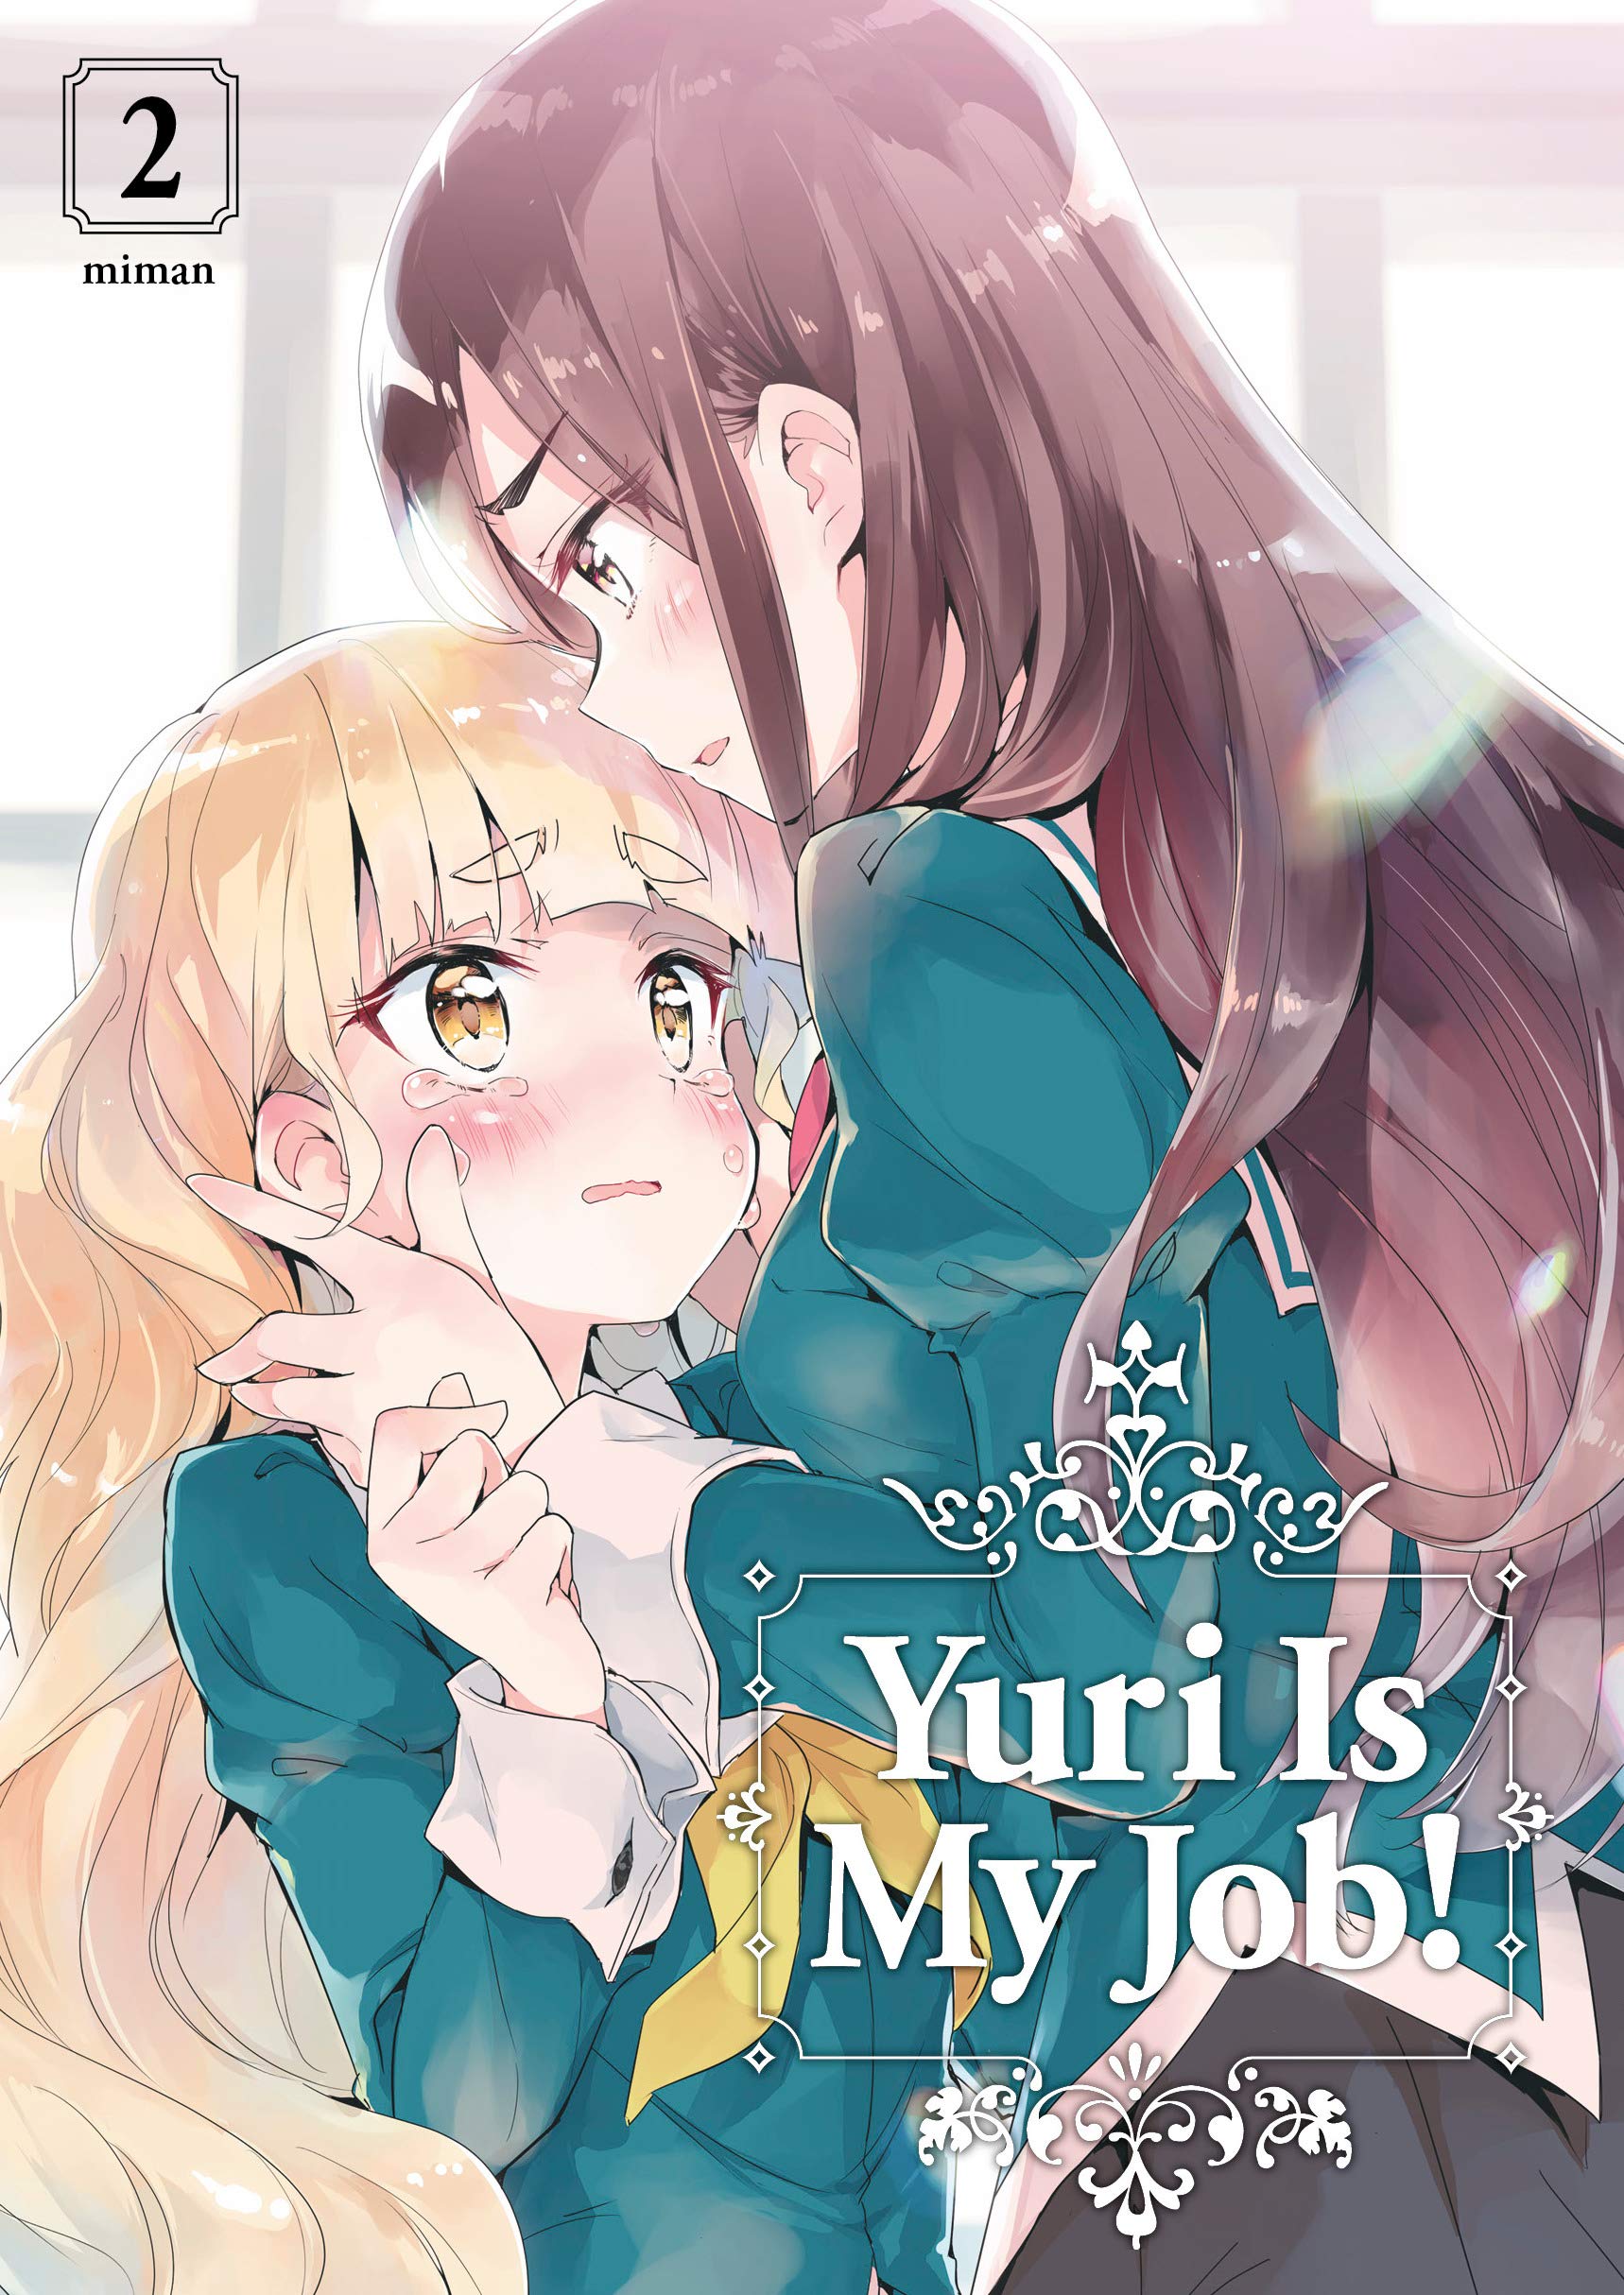 Yuri is My Job Anime Reveals New Trailer Visual and Date